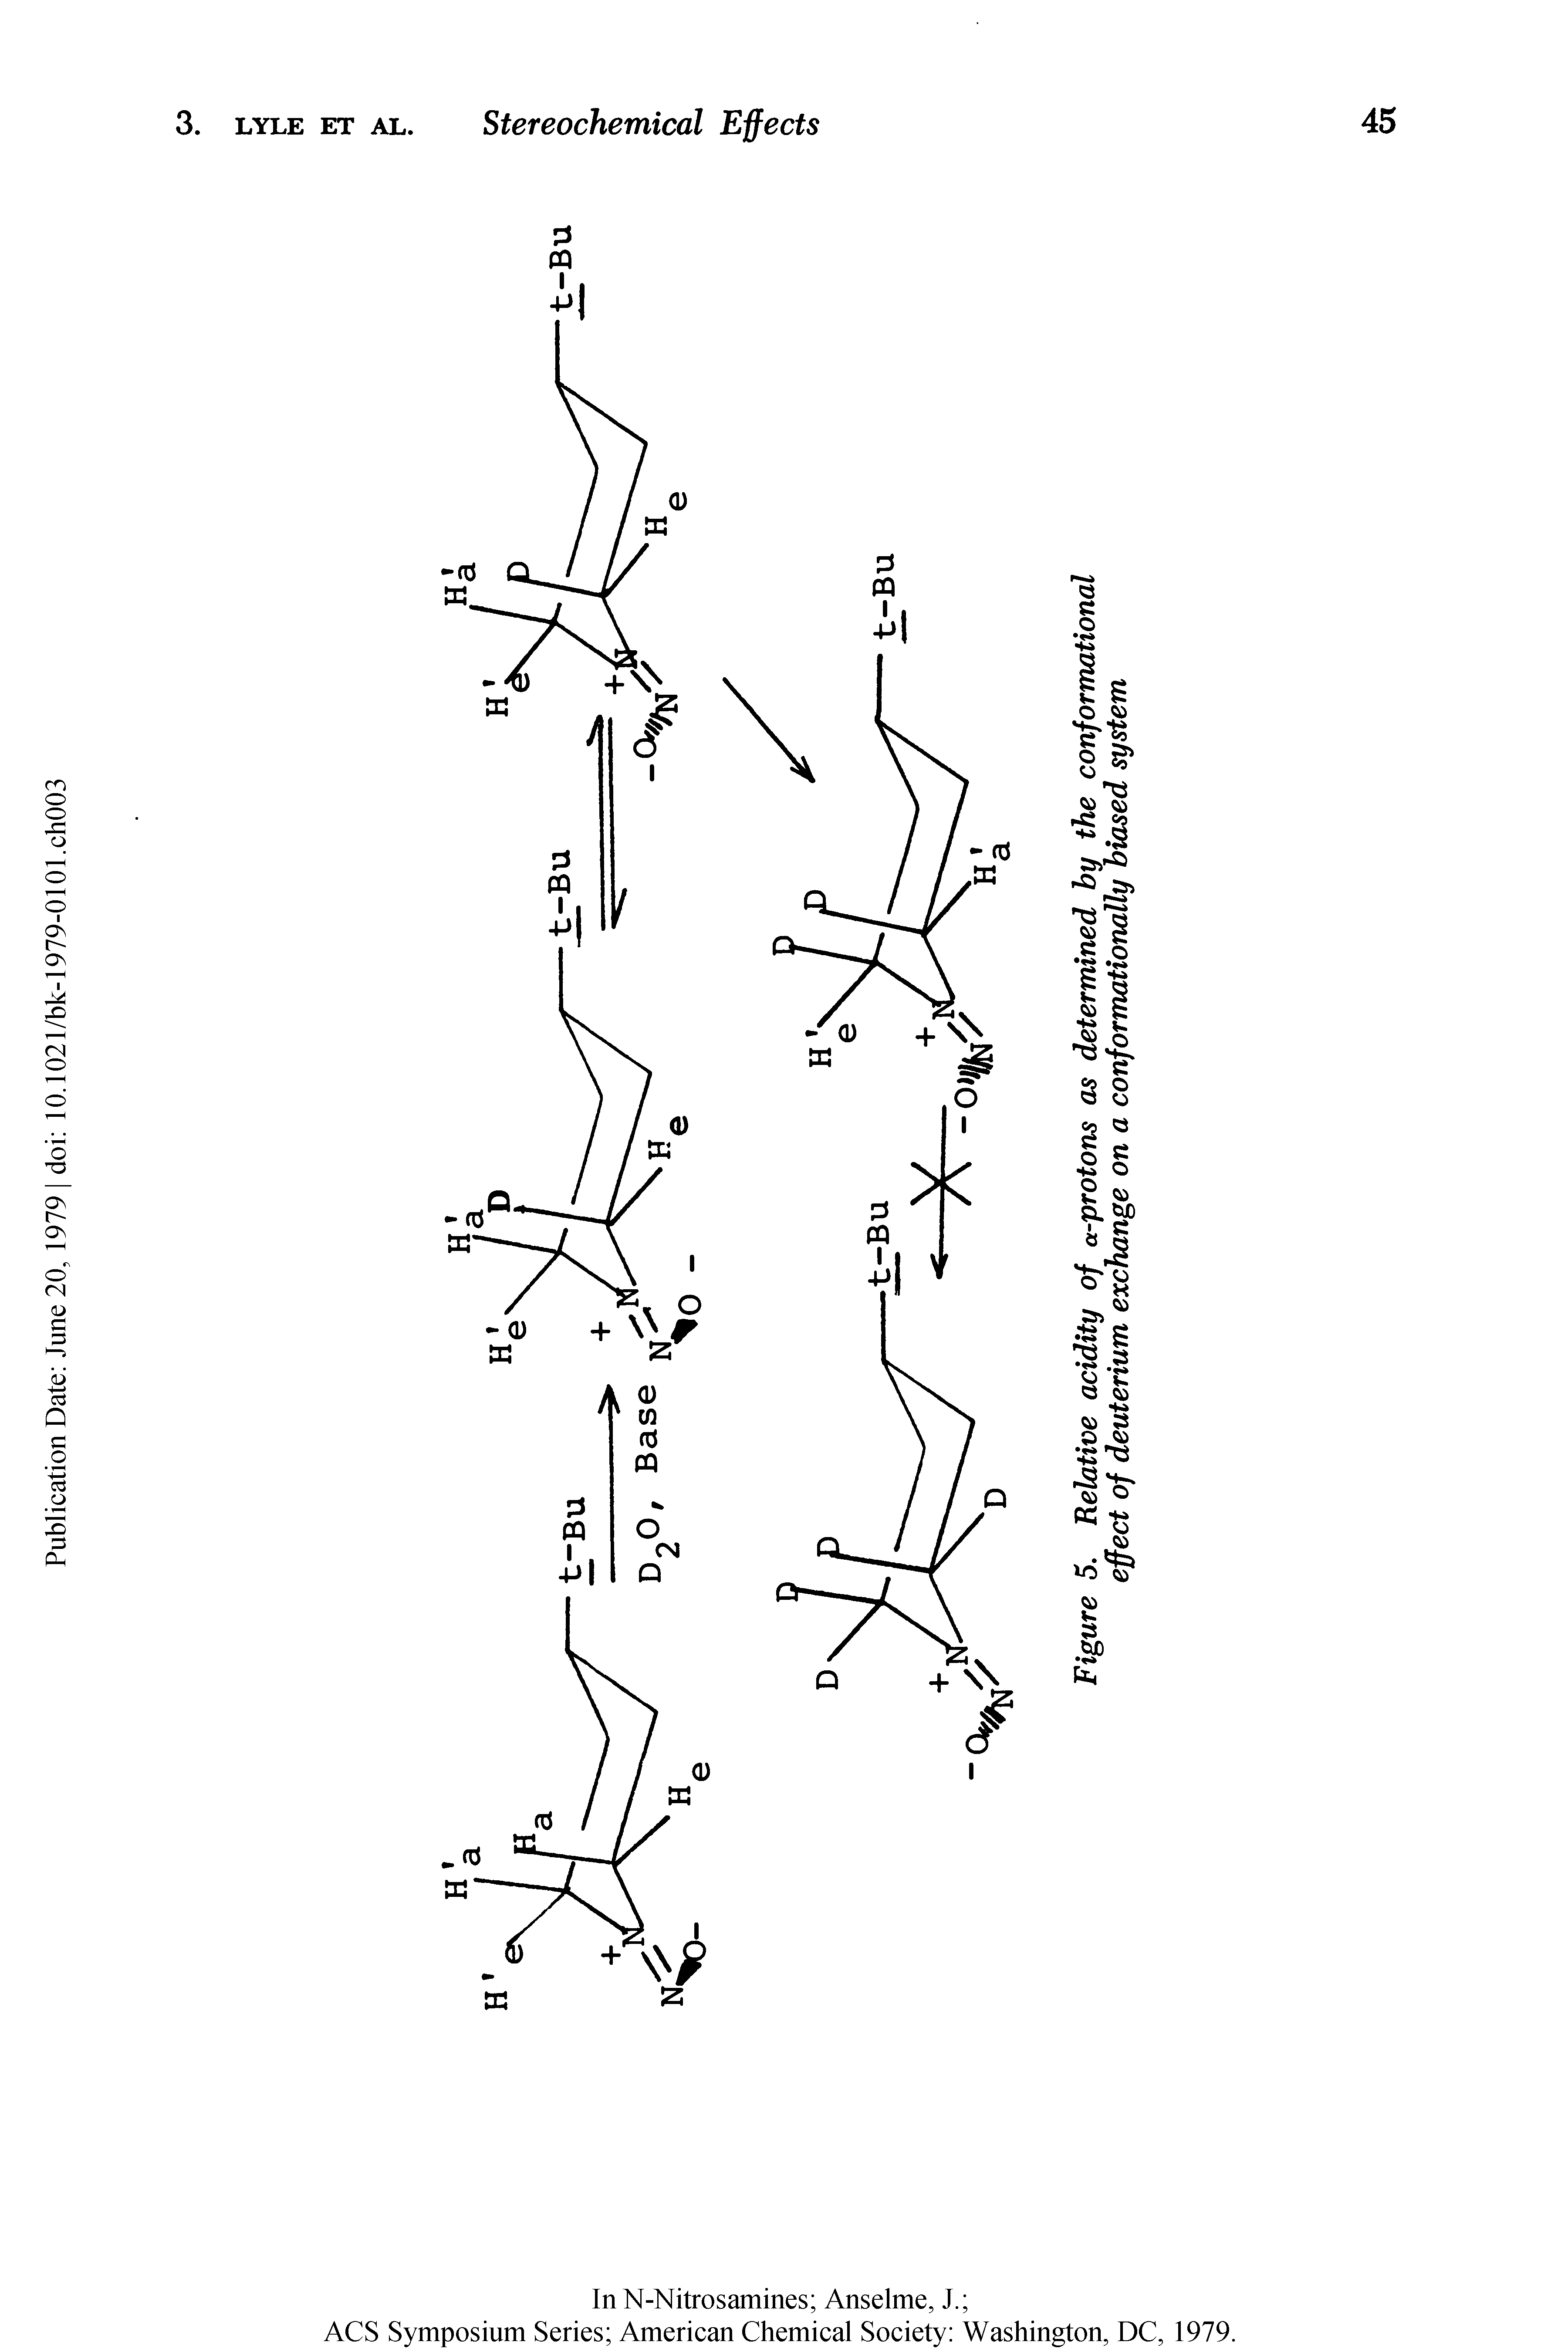 Figure 5. Relative acidity of a-protons as determined by the conformational effect of deuterium exchange on a conformationally biased system...